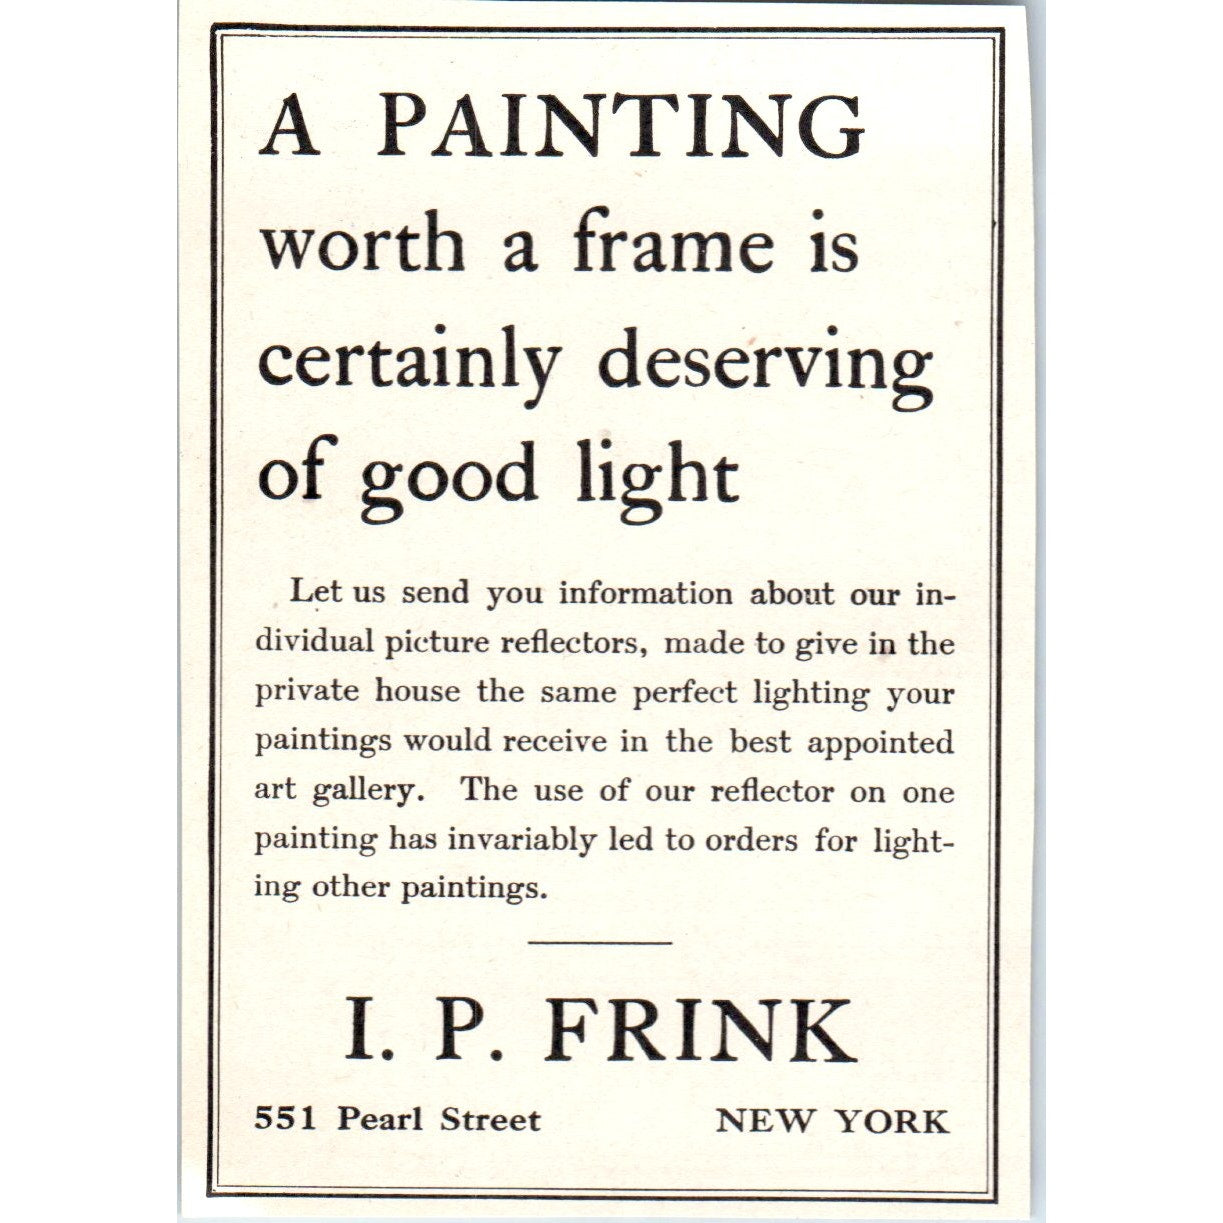 I.P. Frink Framing Pearl St. New York 1908 Victorian Ad AB8-MA9